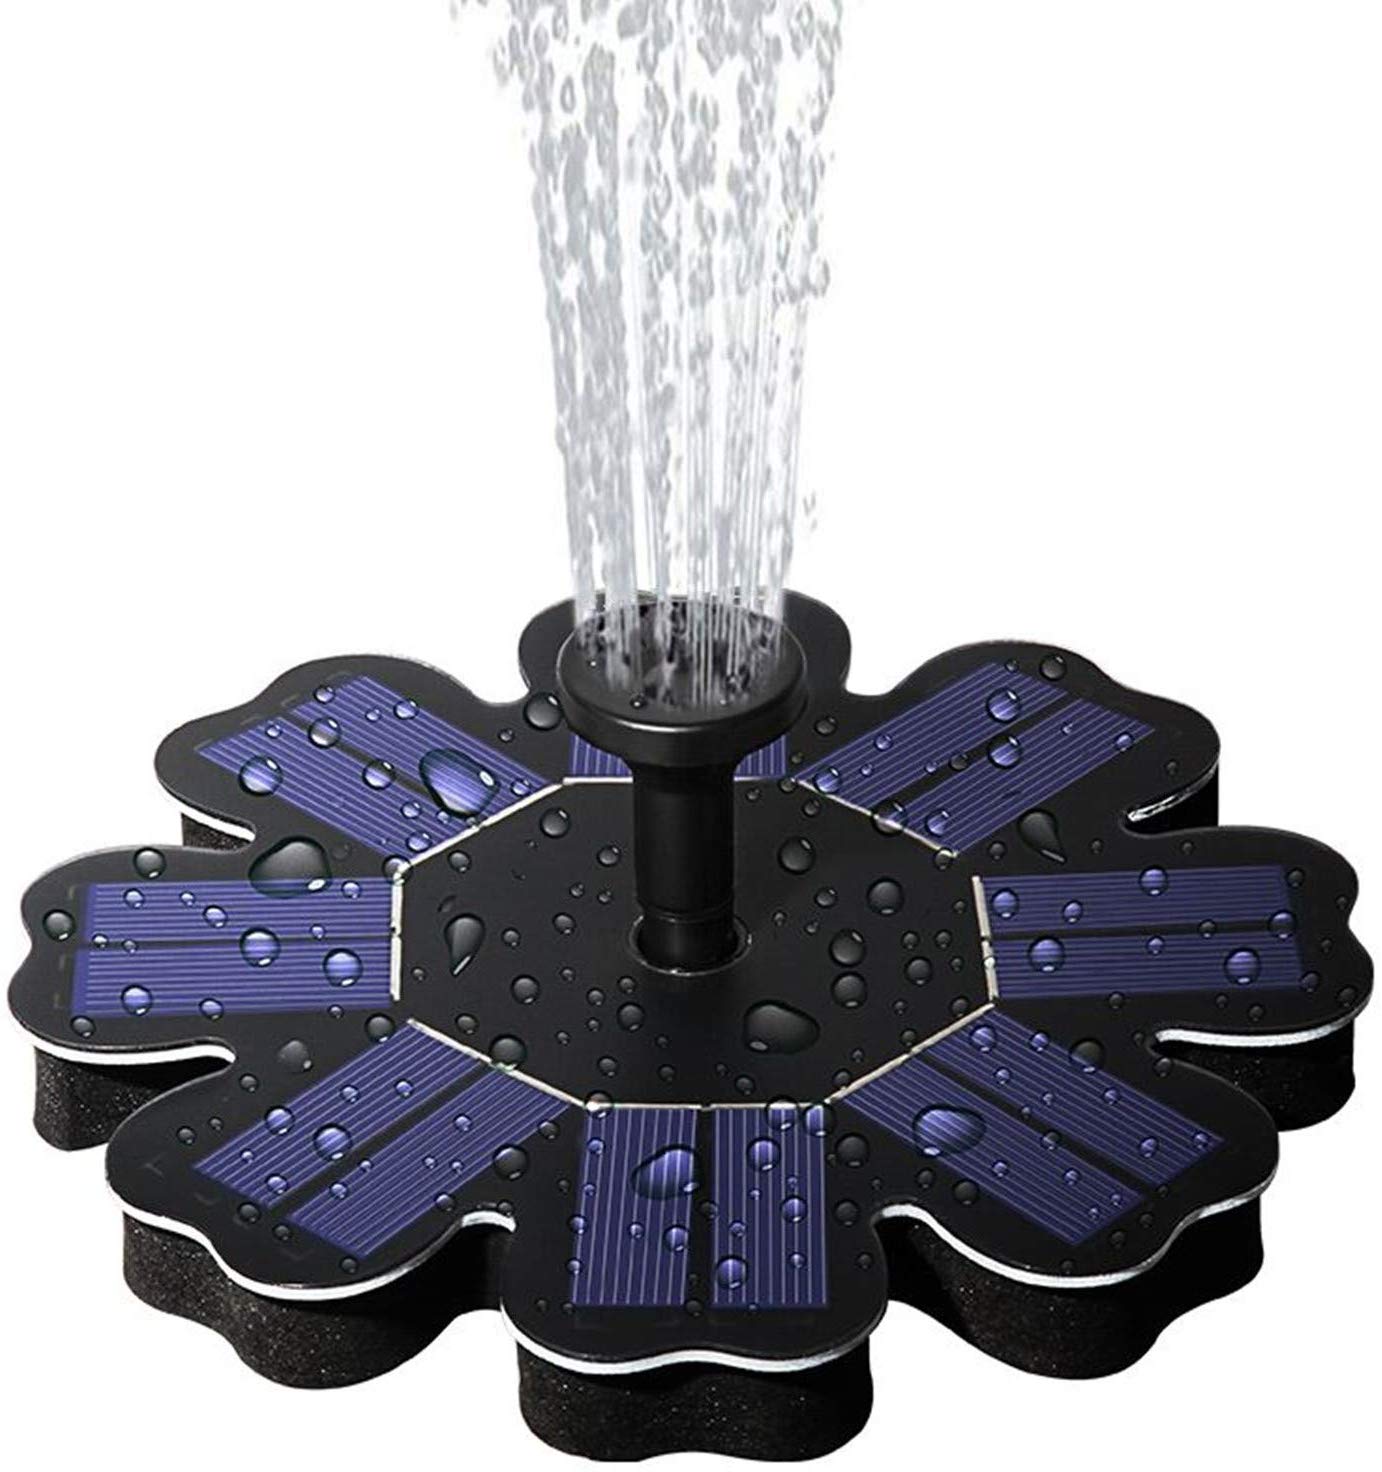 Solar Powered Fountain Pump wi/ different Spray Pattern Heads for Pool, Garden, Pond